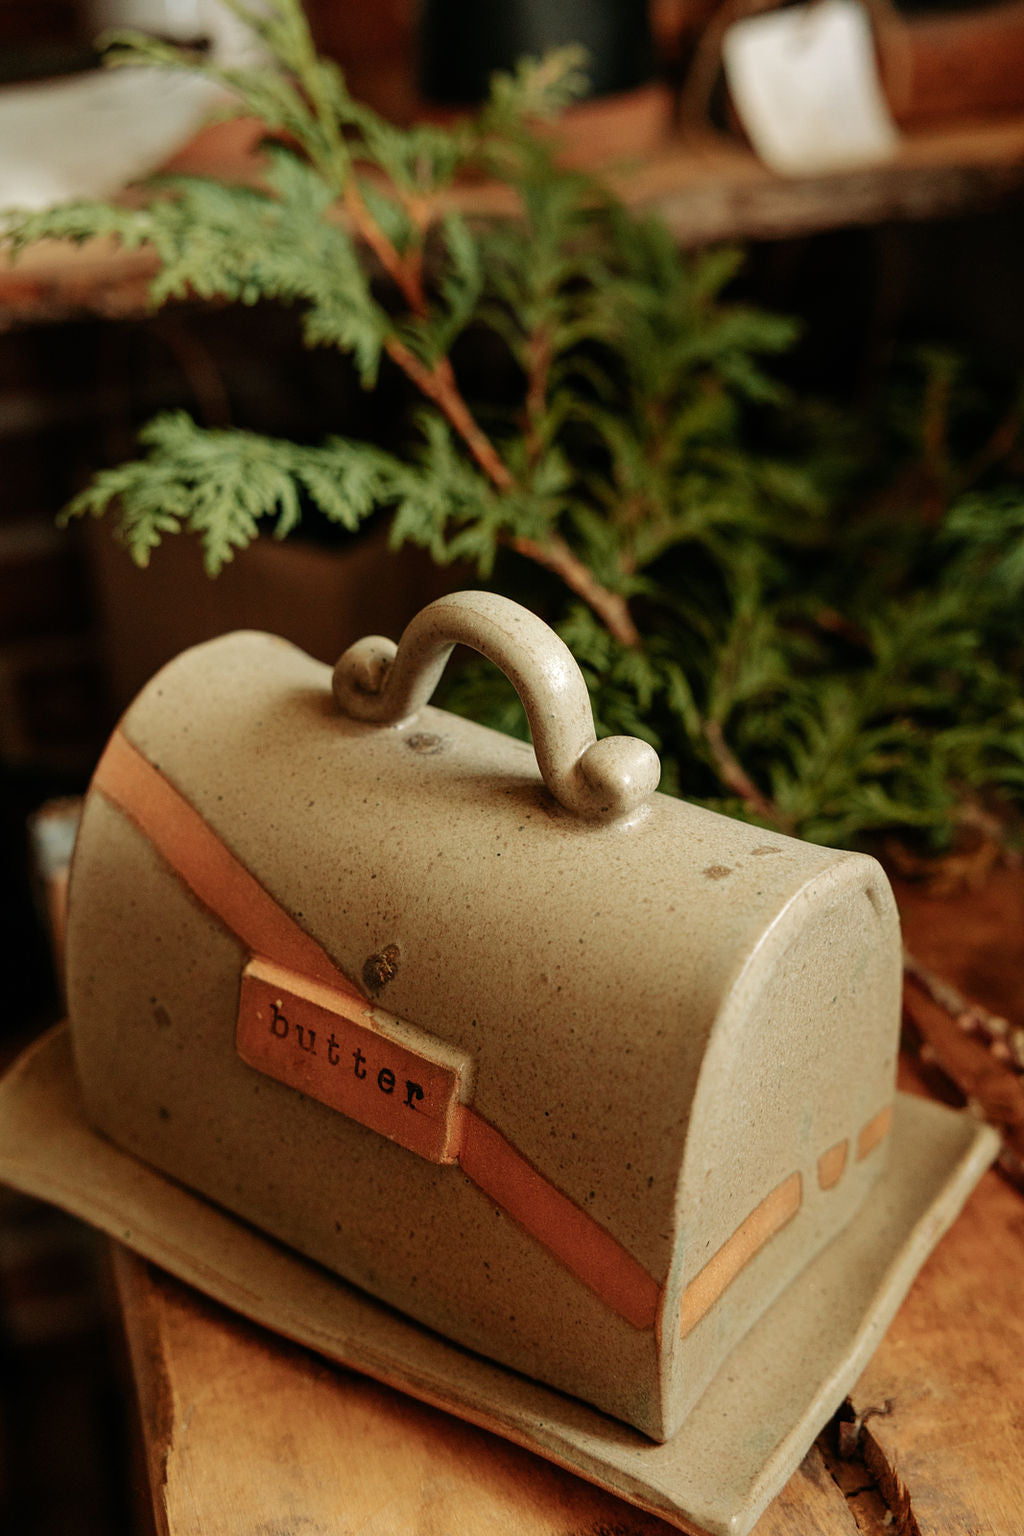 Pottery Butter Dish for the Canadian Block of Butter